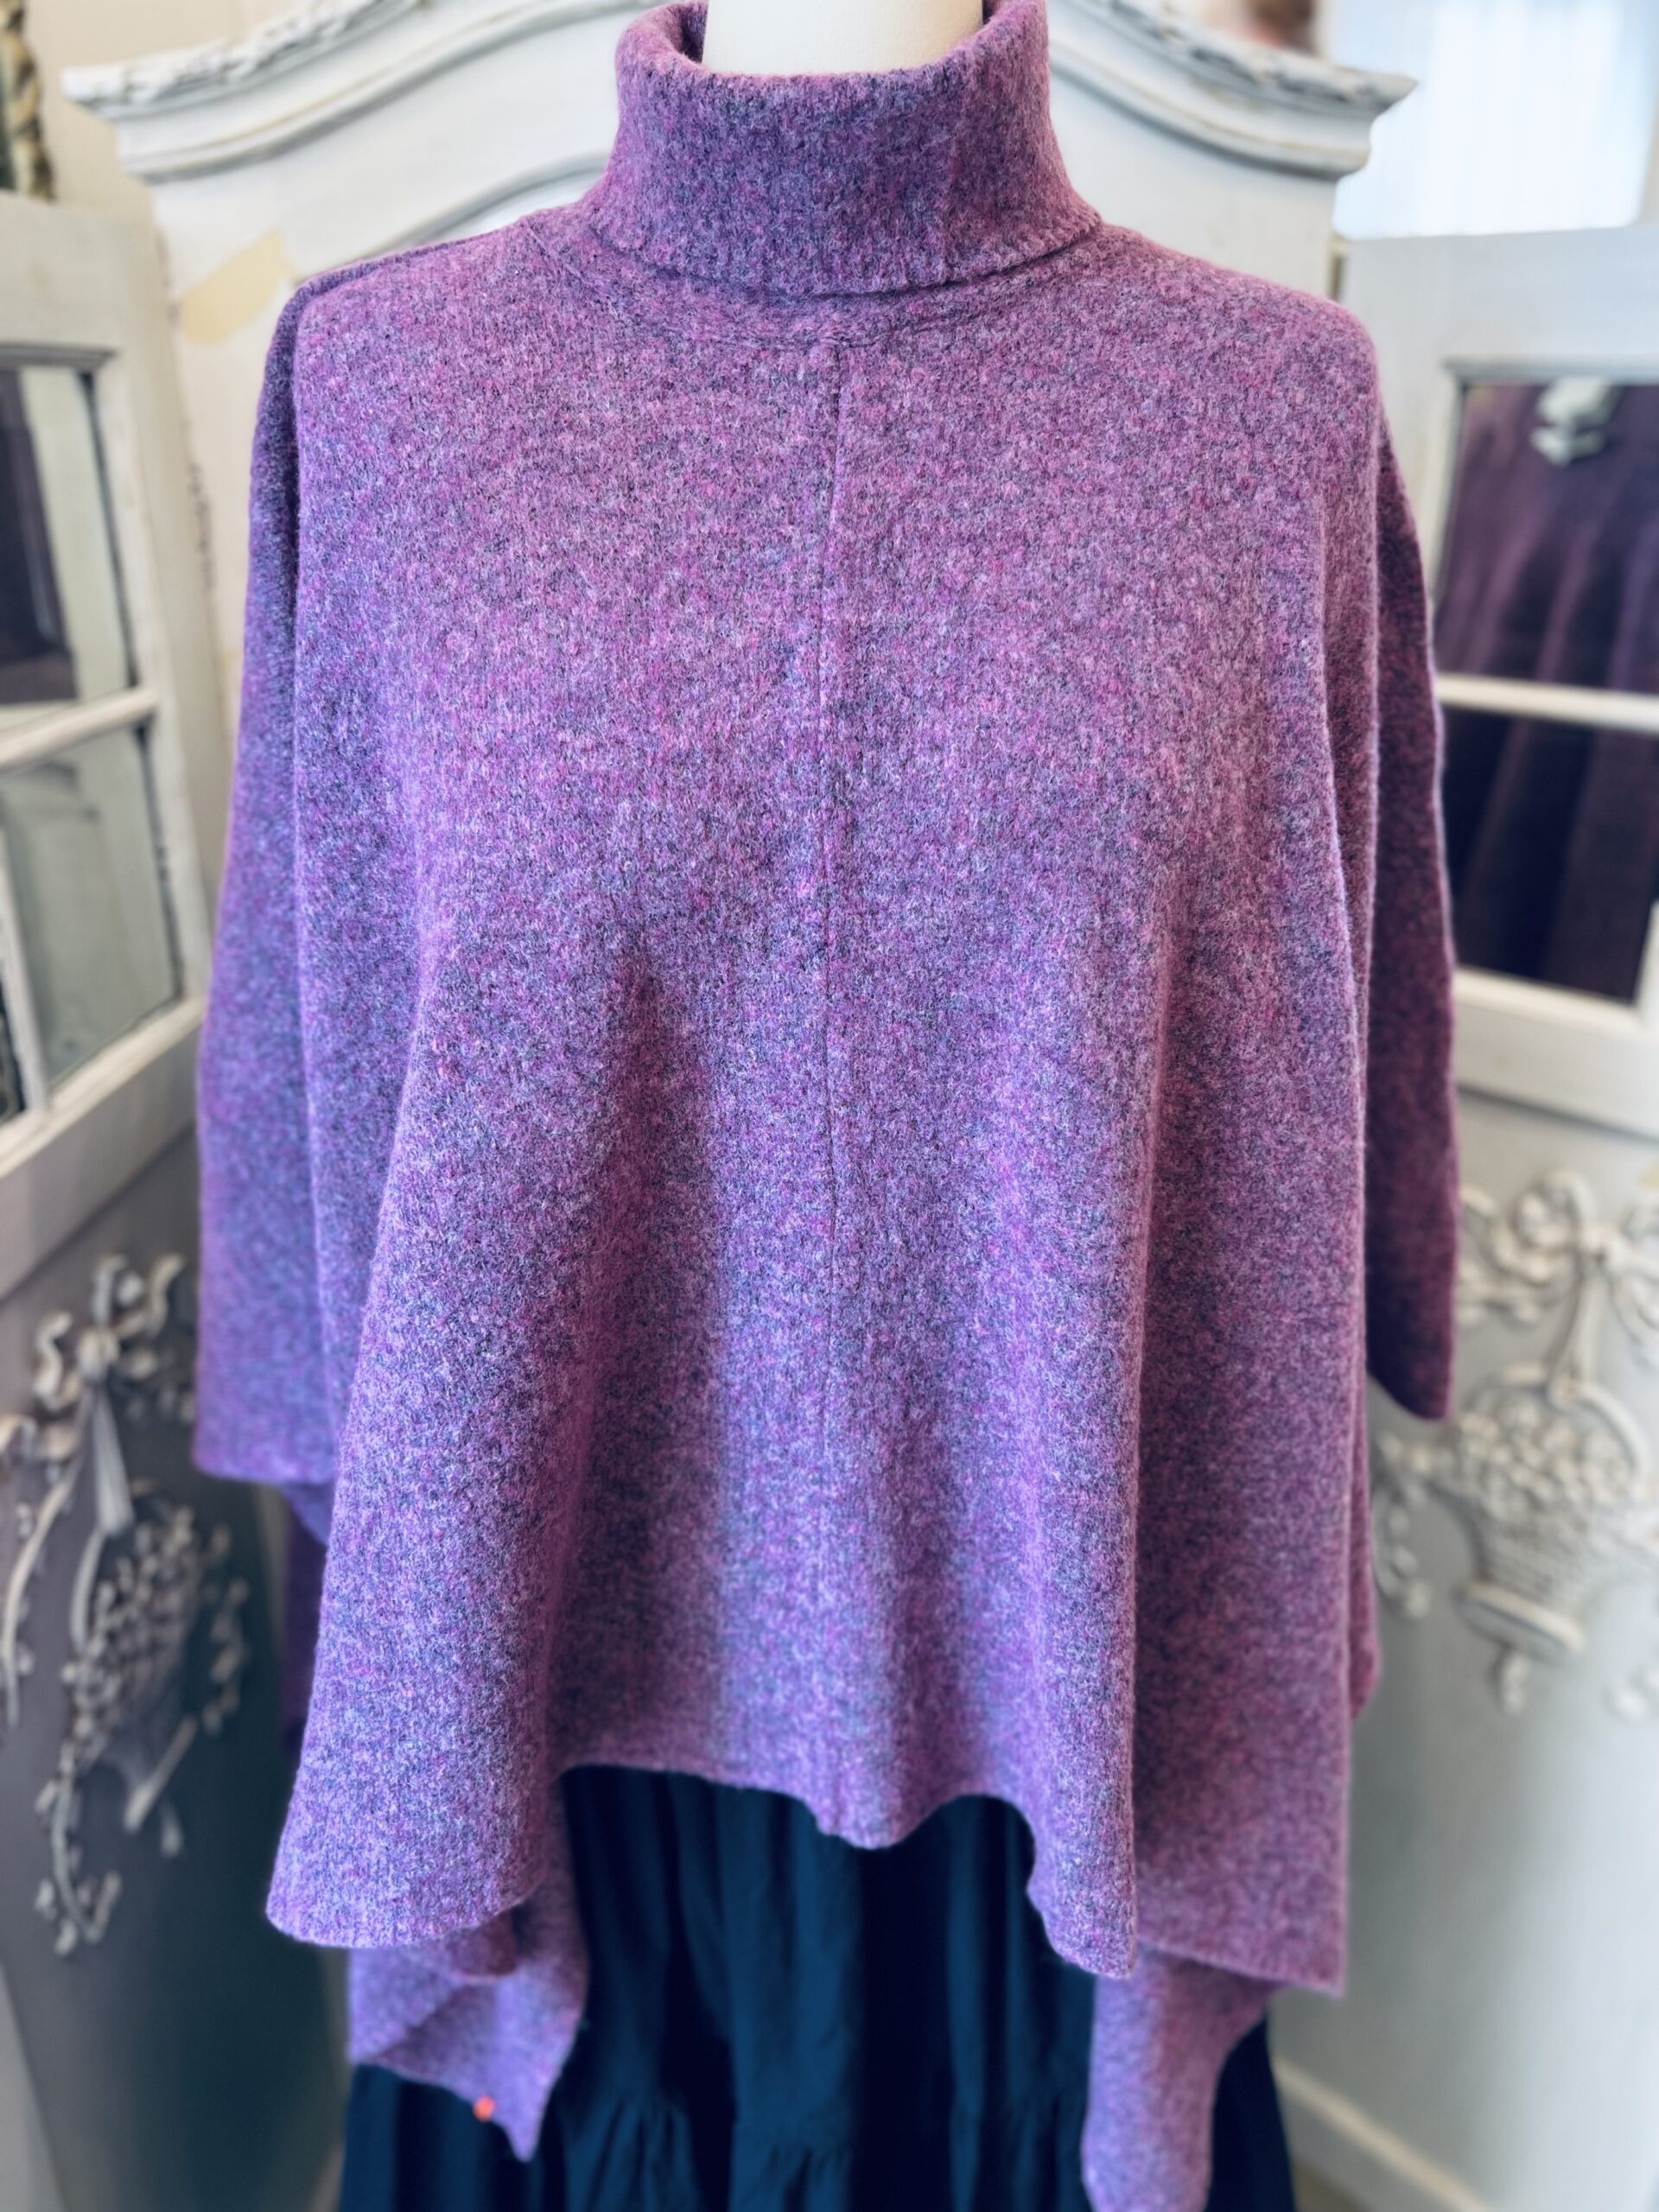 Maevy Astro Poncho in Violet and Violine